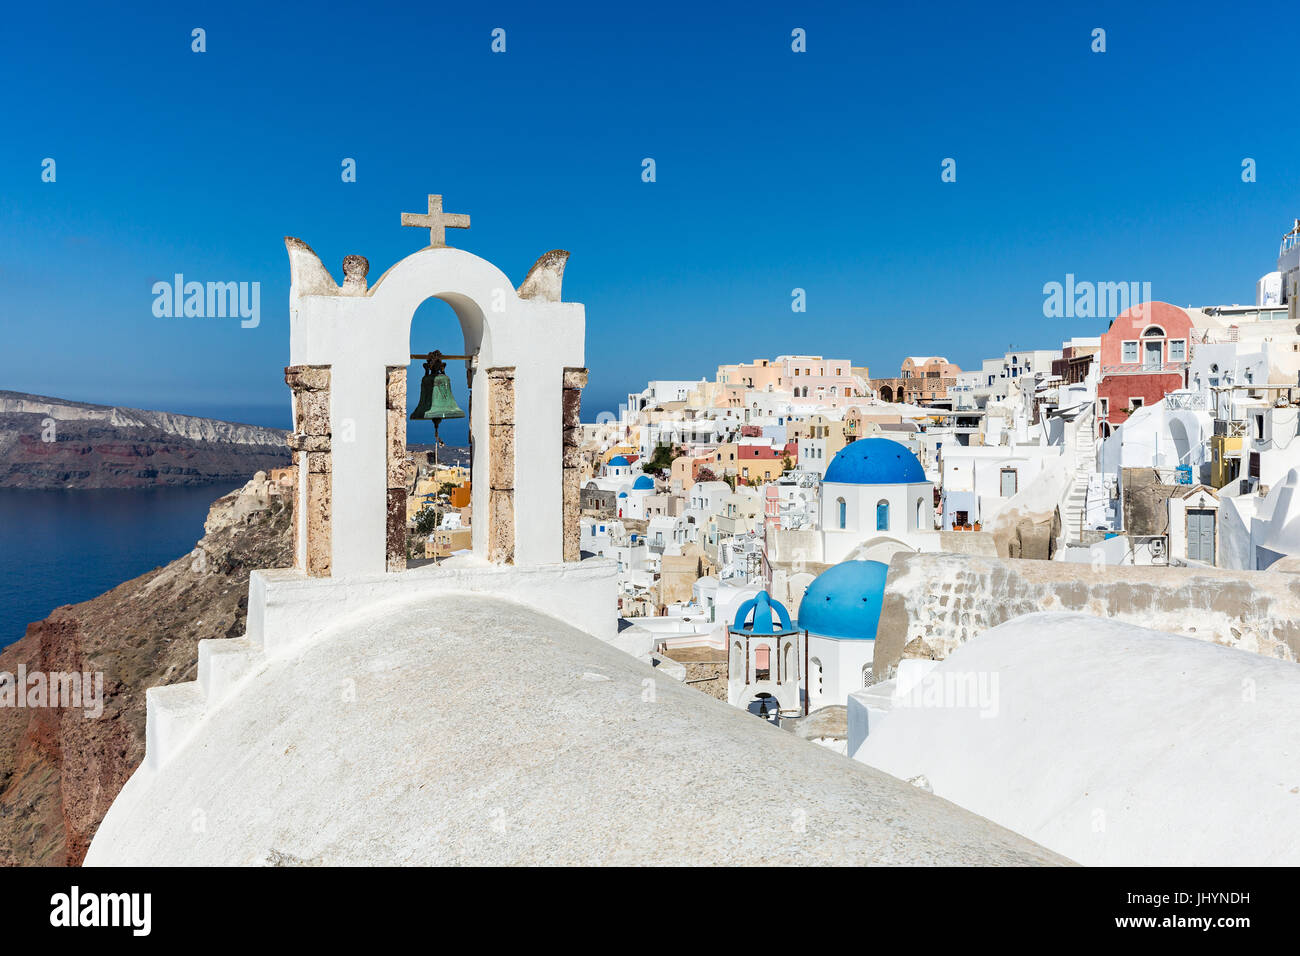 A church roof and bell with the white washed stone walls and blue church cupolas of Oia, Santorini, Greece Stock Photo